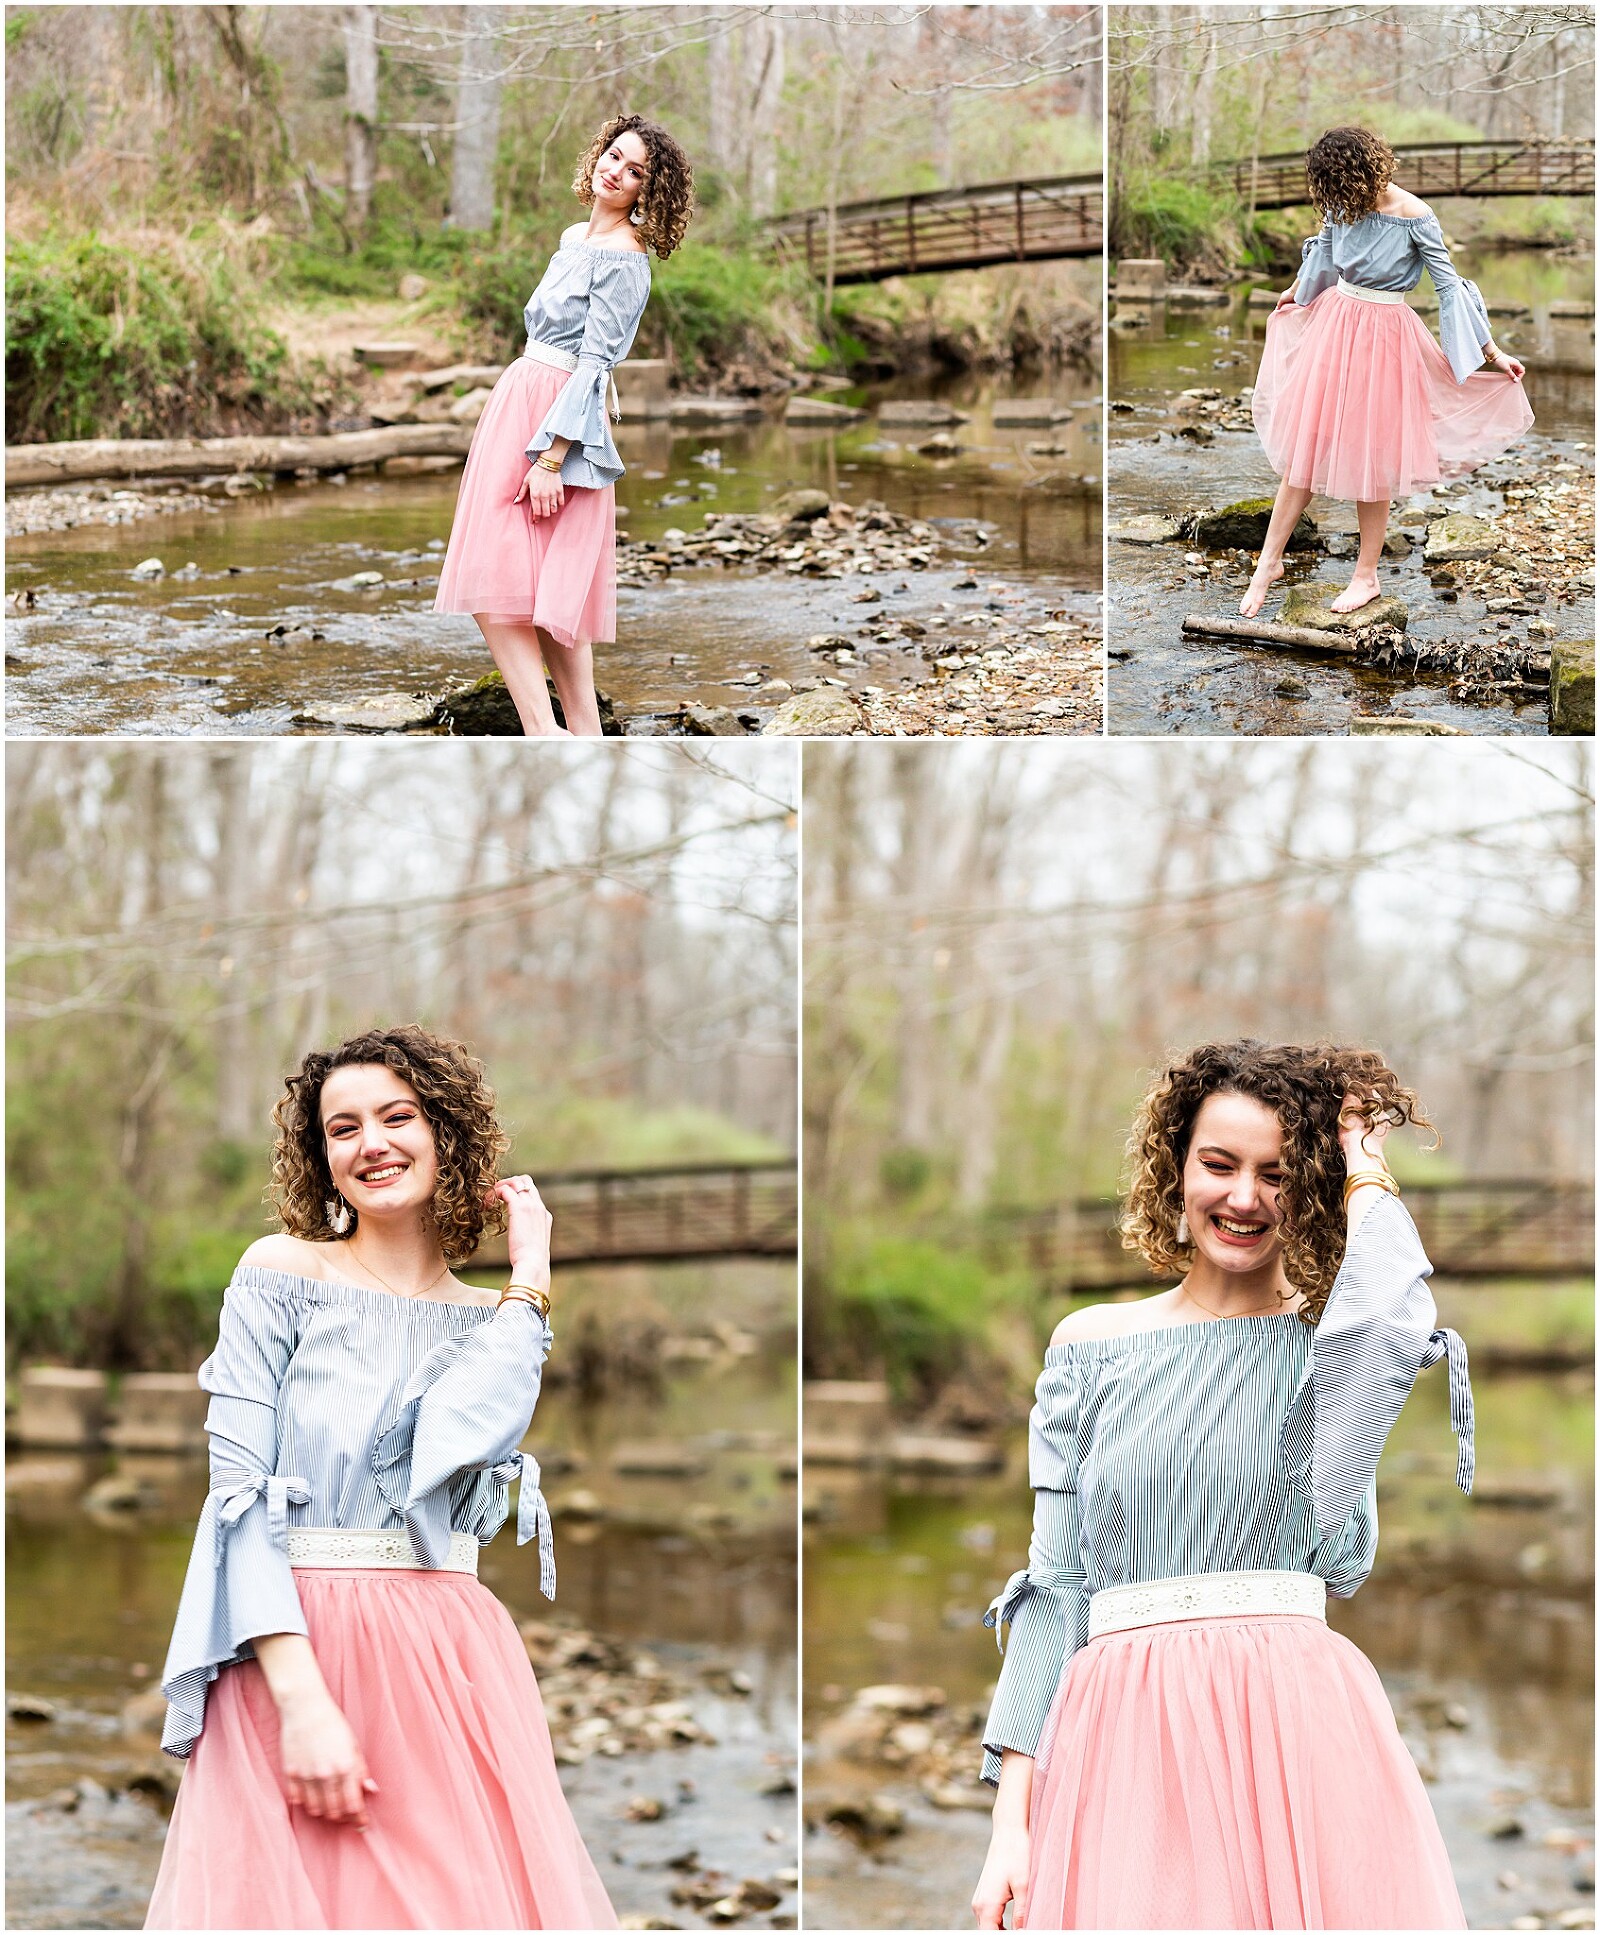 Oh my, how fun it was to photograph Matea for her high school senior session! We went to Ellanor Lawrence Park in Fairfax, Virginia, and had a lovely time on their footbridge and splashing around in the little stream underneath. They also had a beautiful tulip magnolia tree that we took some photos under! Click the link to see her FULL SPRING SENIOR SESSION! Photo by Bethanie Vetter Photography LLC. Website: bethanievetter.com #springseniorphotos #seniorphotos #virginiasenior #seniorportraits #springphotos #springflowers #footbridge #footbridgephotos #eclawrence #eclawrencepark #waterphotosession #stream #riverphotos #springseniorphotos #springsenior #floralsesssion #floralphotos #flowercrown #bethanievetterportraits #bethanievetterphotography #curlyhair #curlygirl #tulipmagnolia #tulipmagnoliatree #tulleskirt